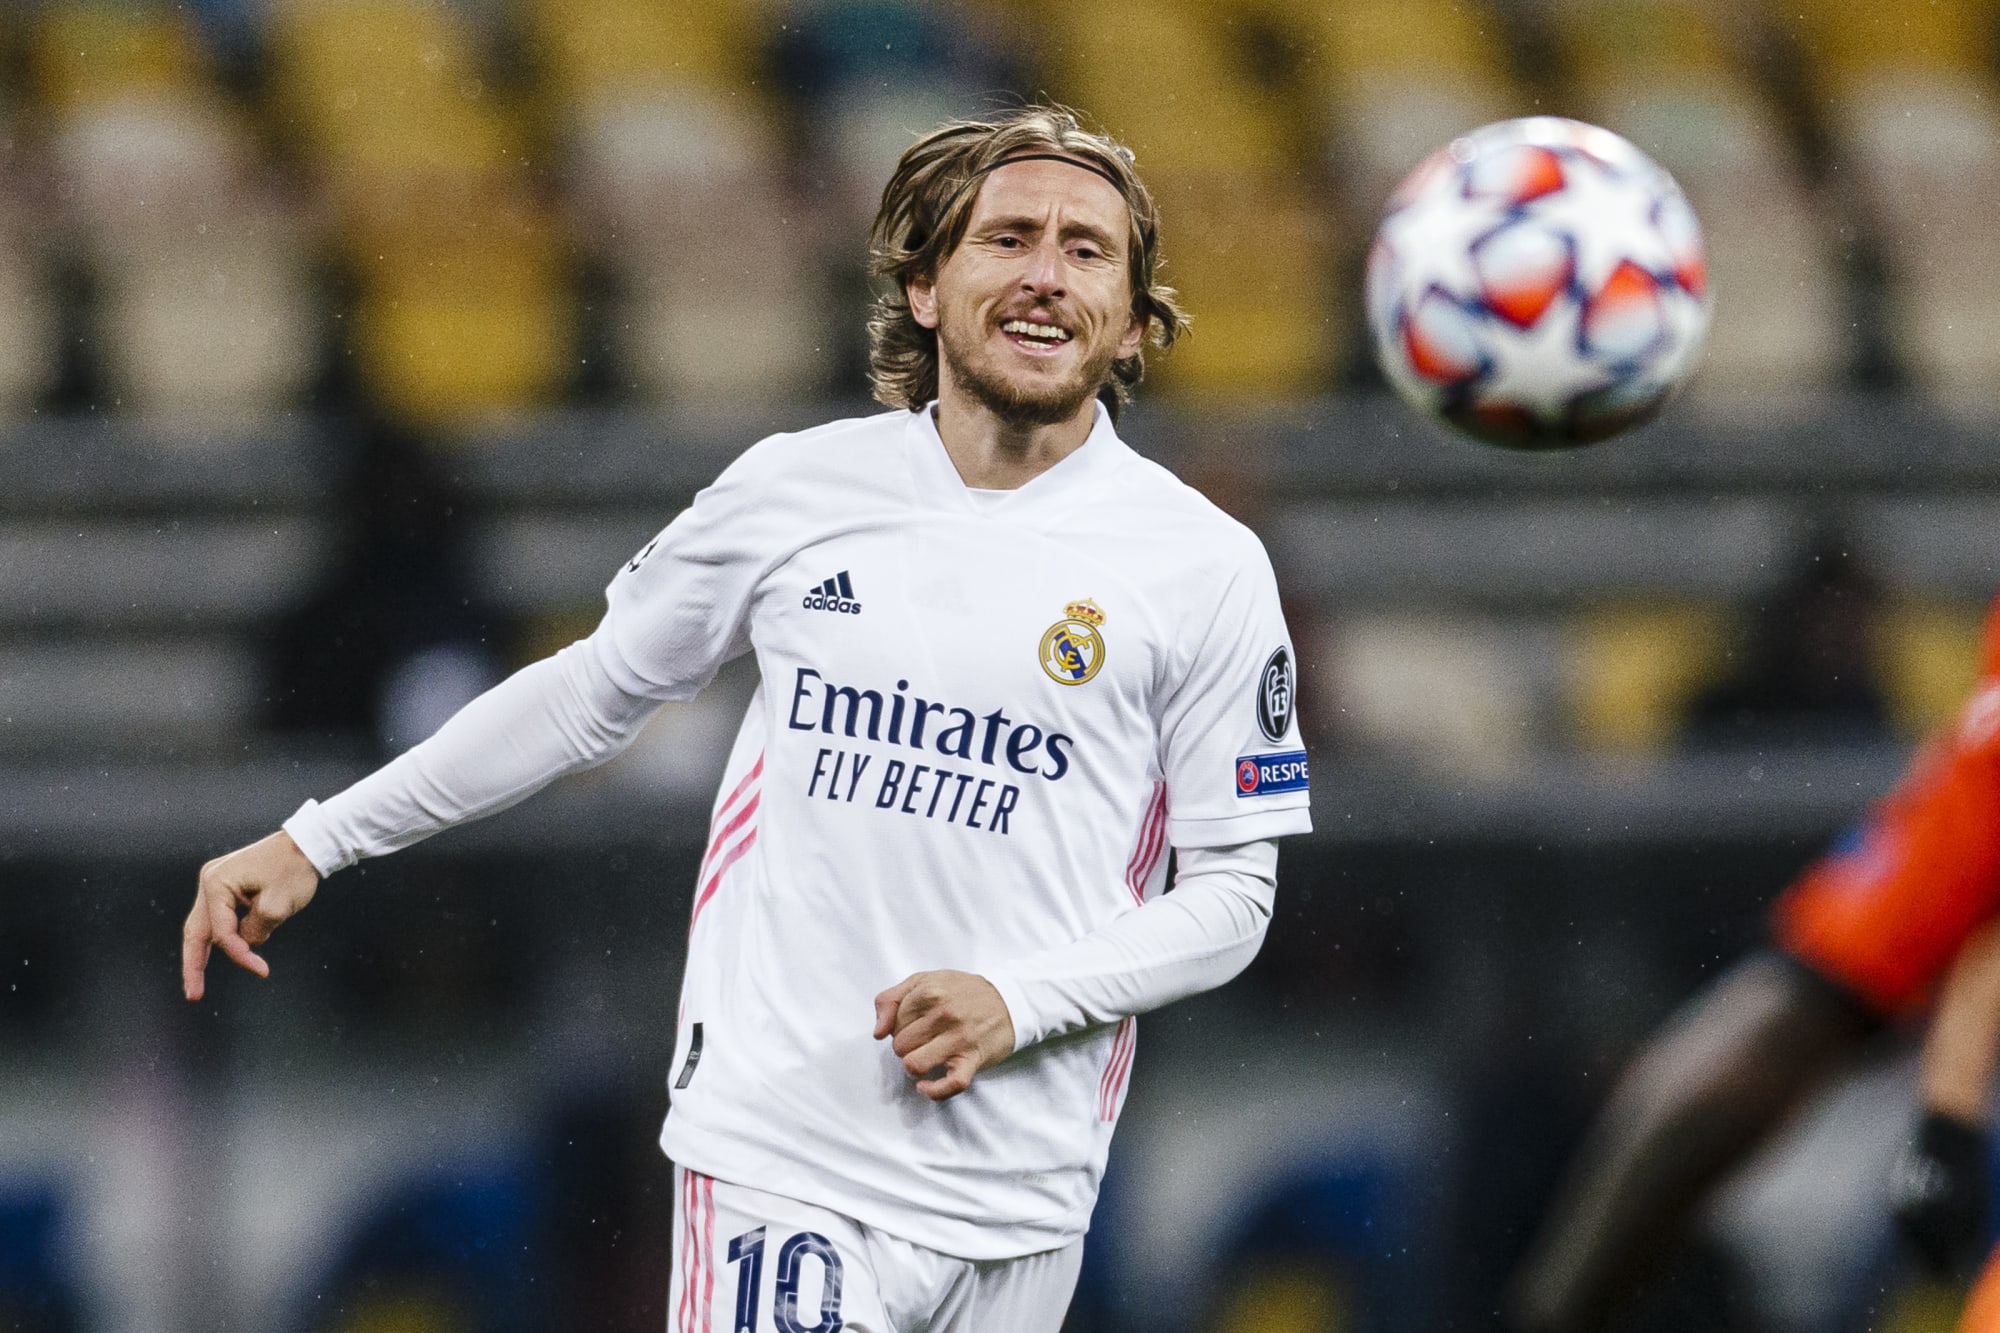  Luka Modric, a Croatian midfielder, is playing for Real Madrid in a white jersey with the number 10. He has long hair and is looking up at the ball.